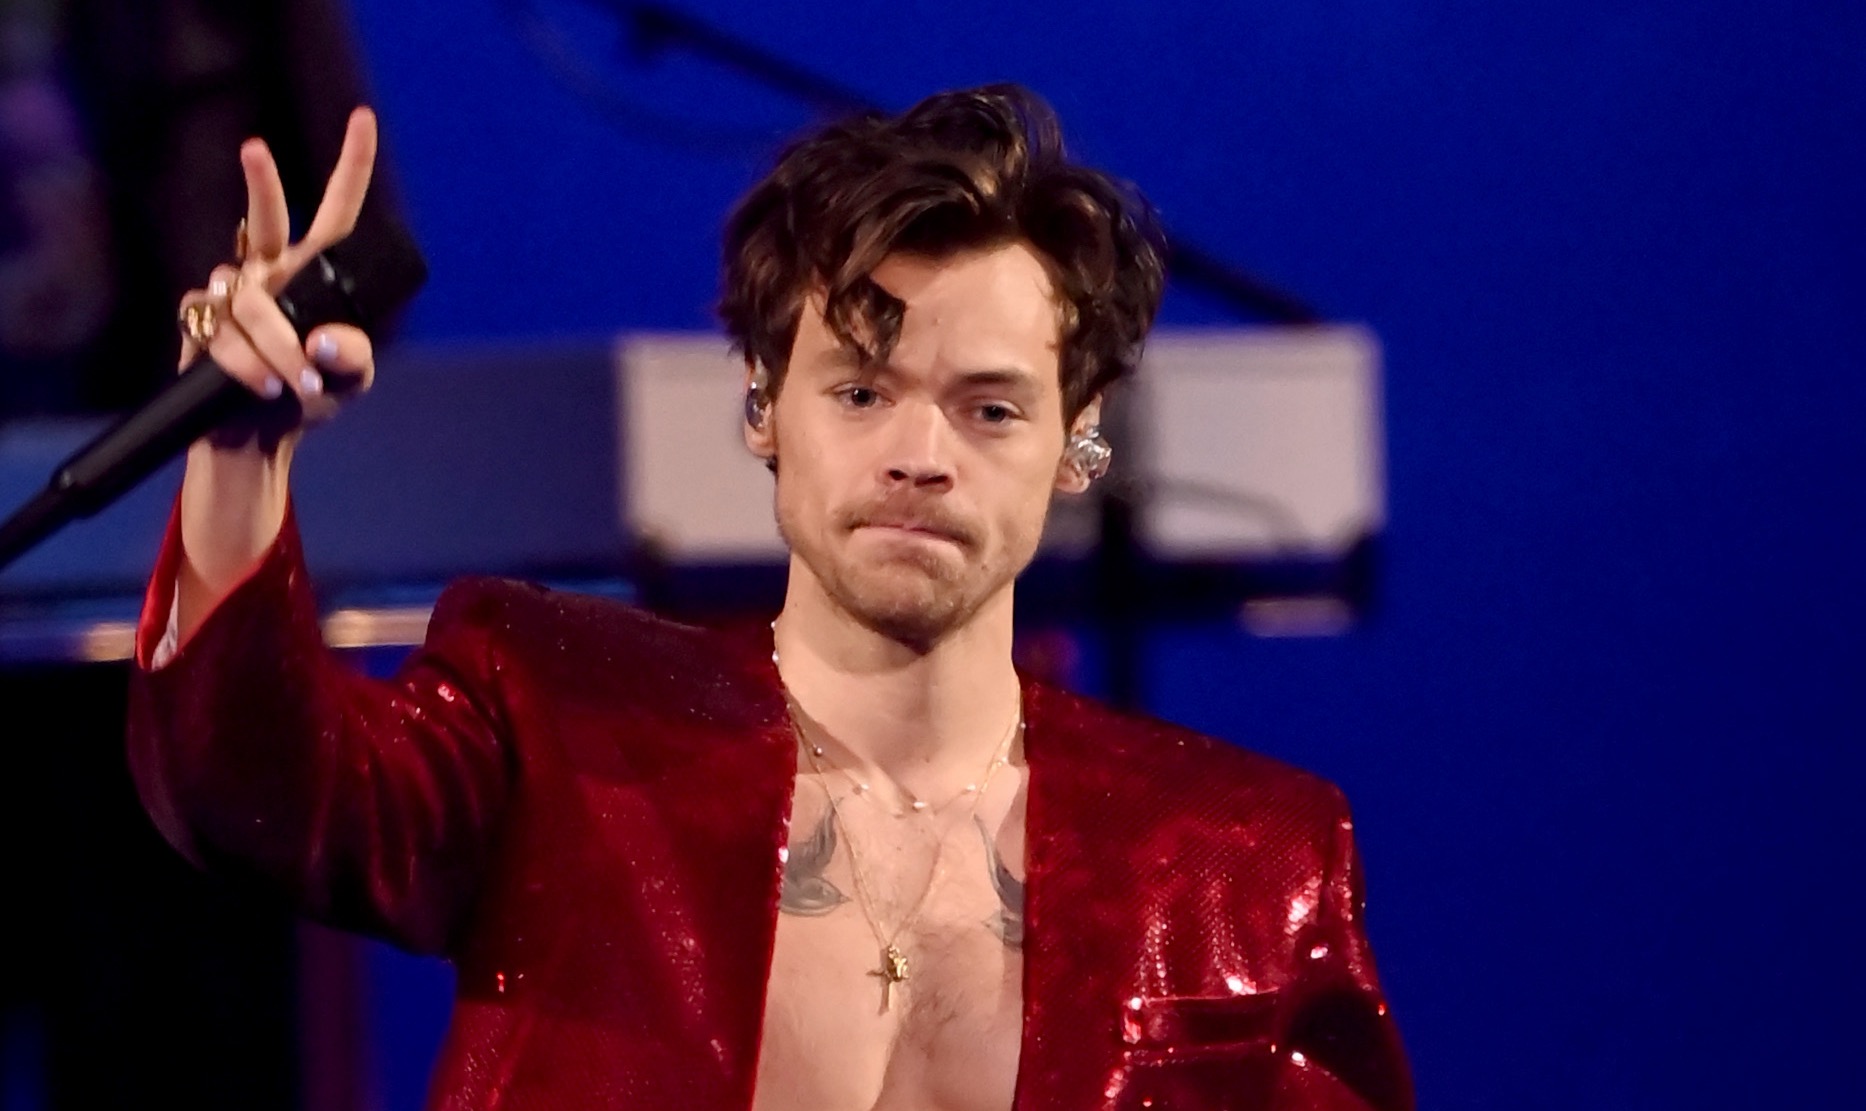 Harry Styles wearing a red coat while holding a mic